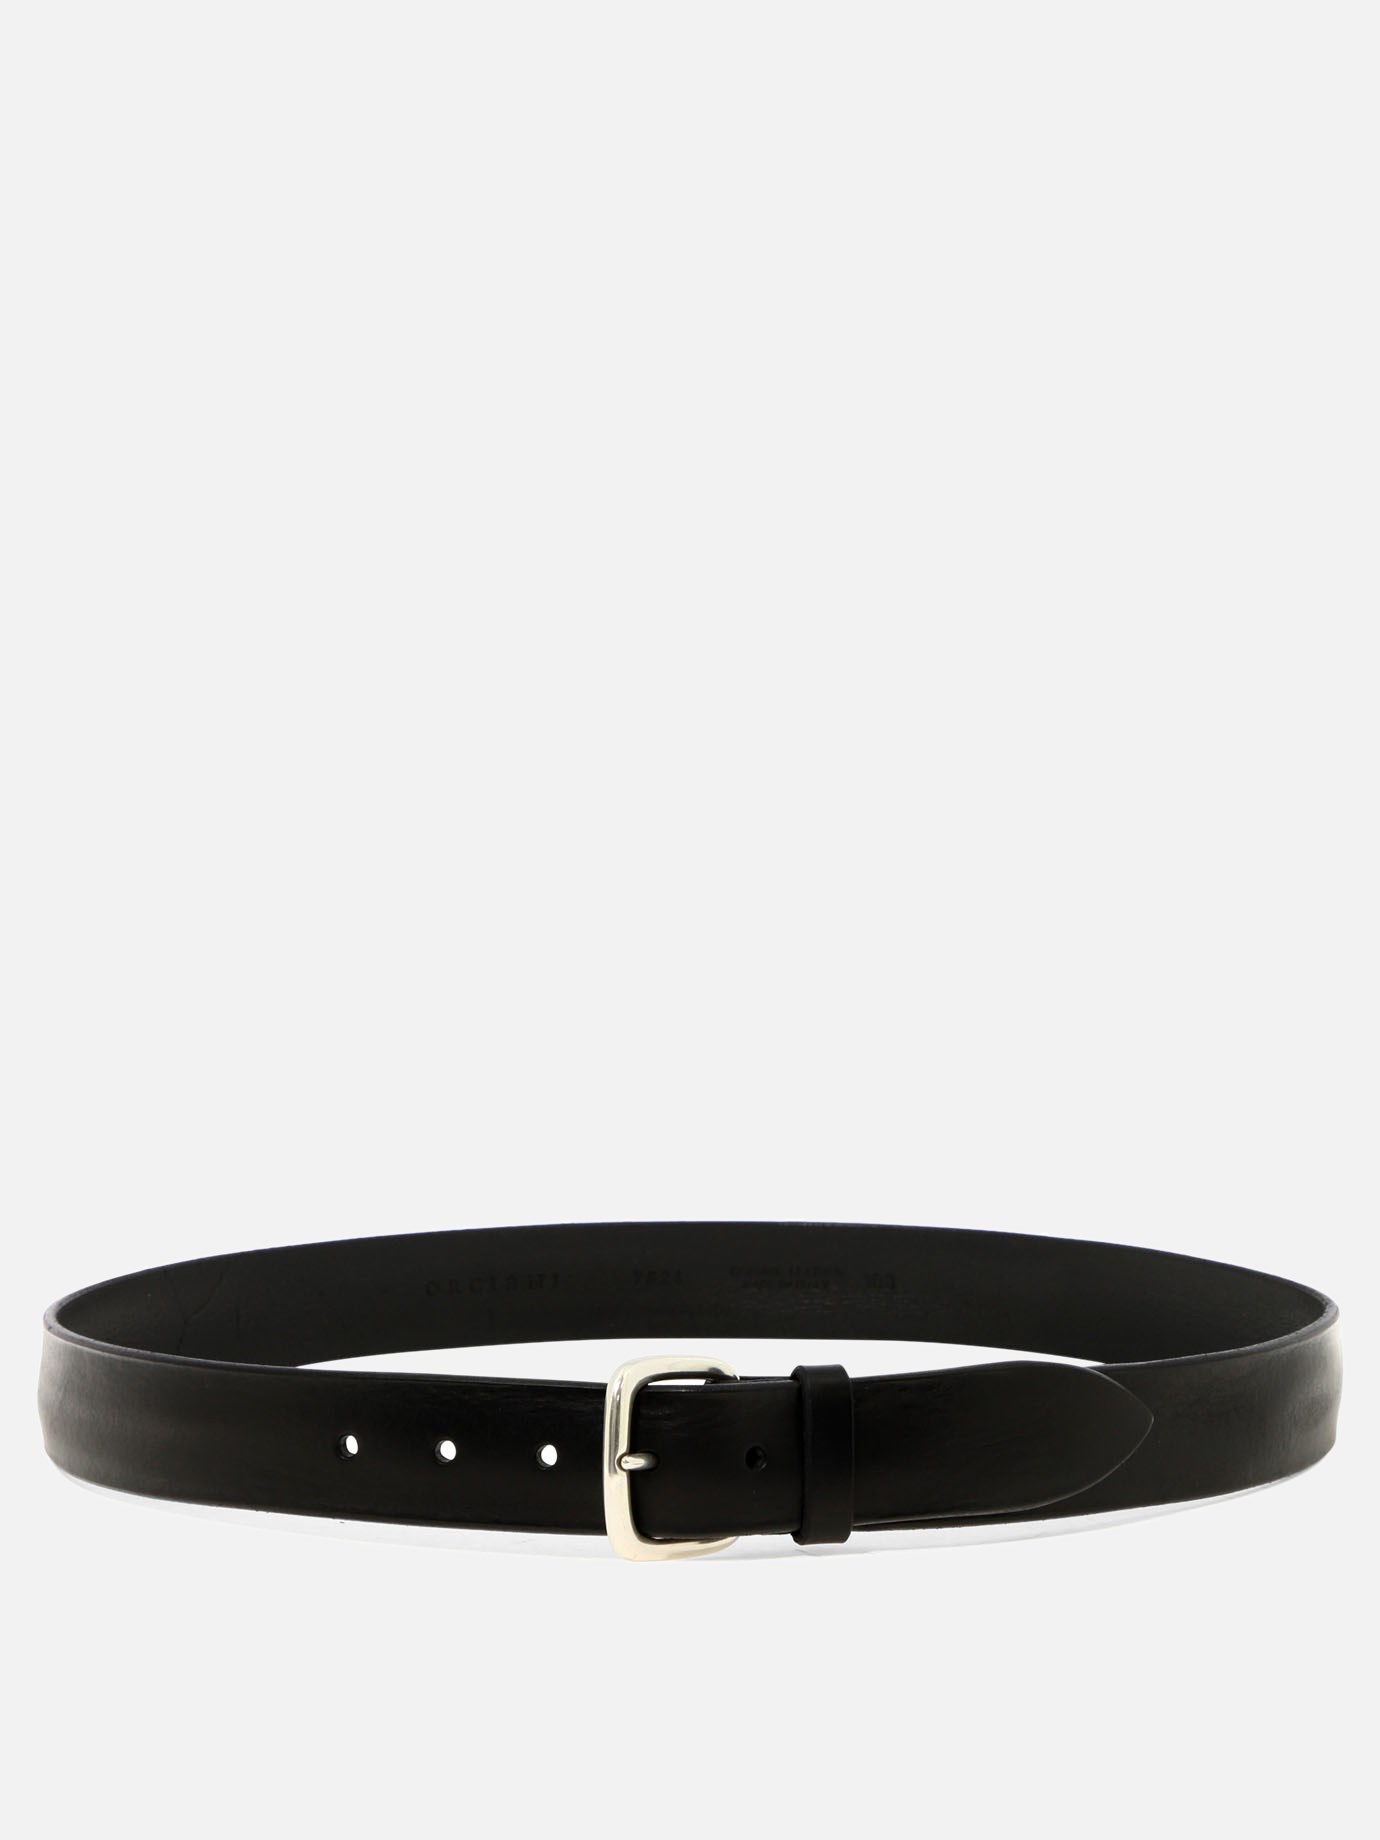 Bull Soft  beltby Orciani - 1